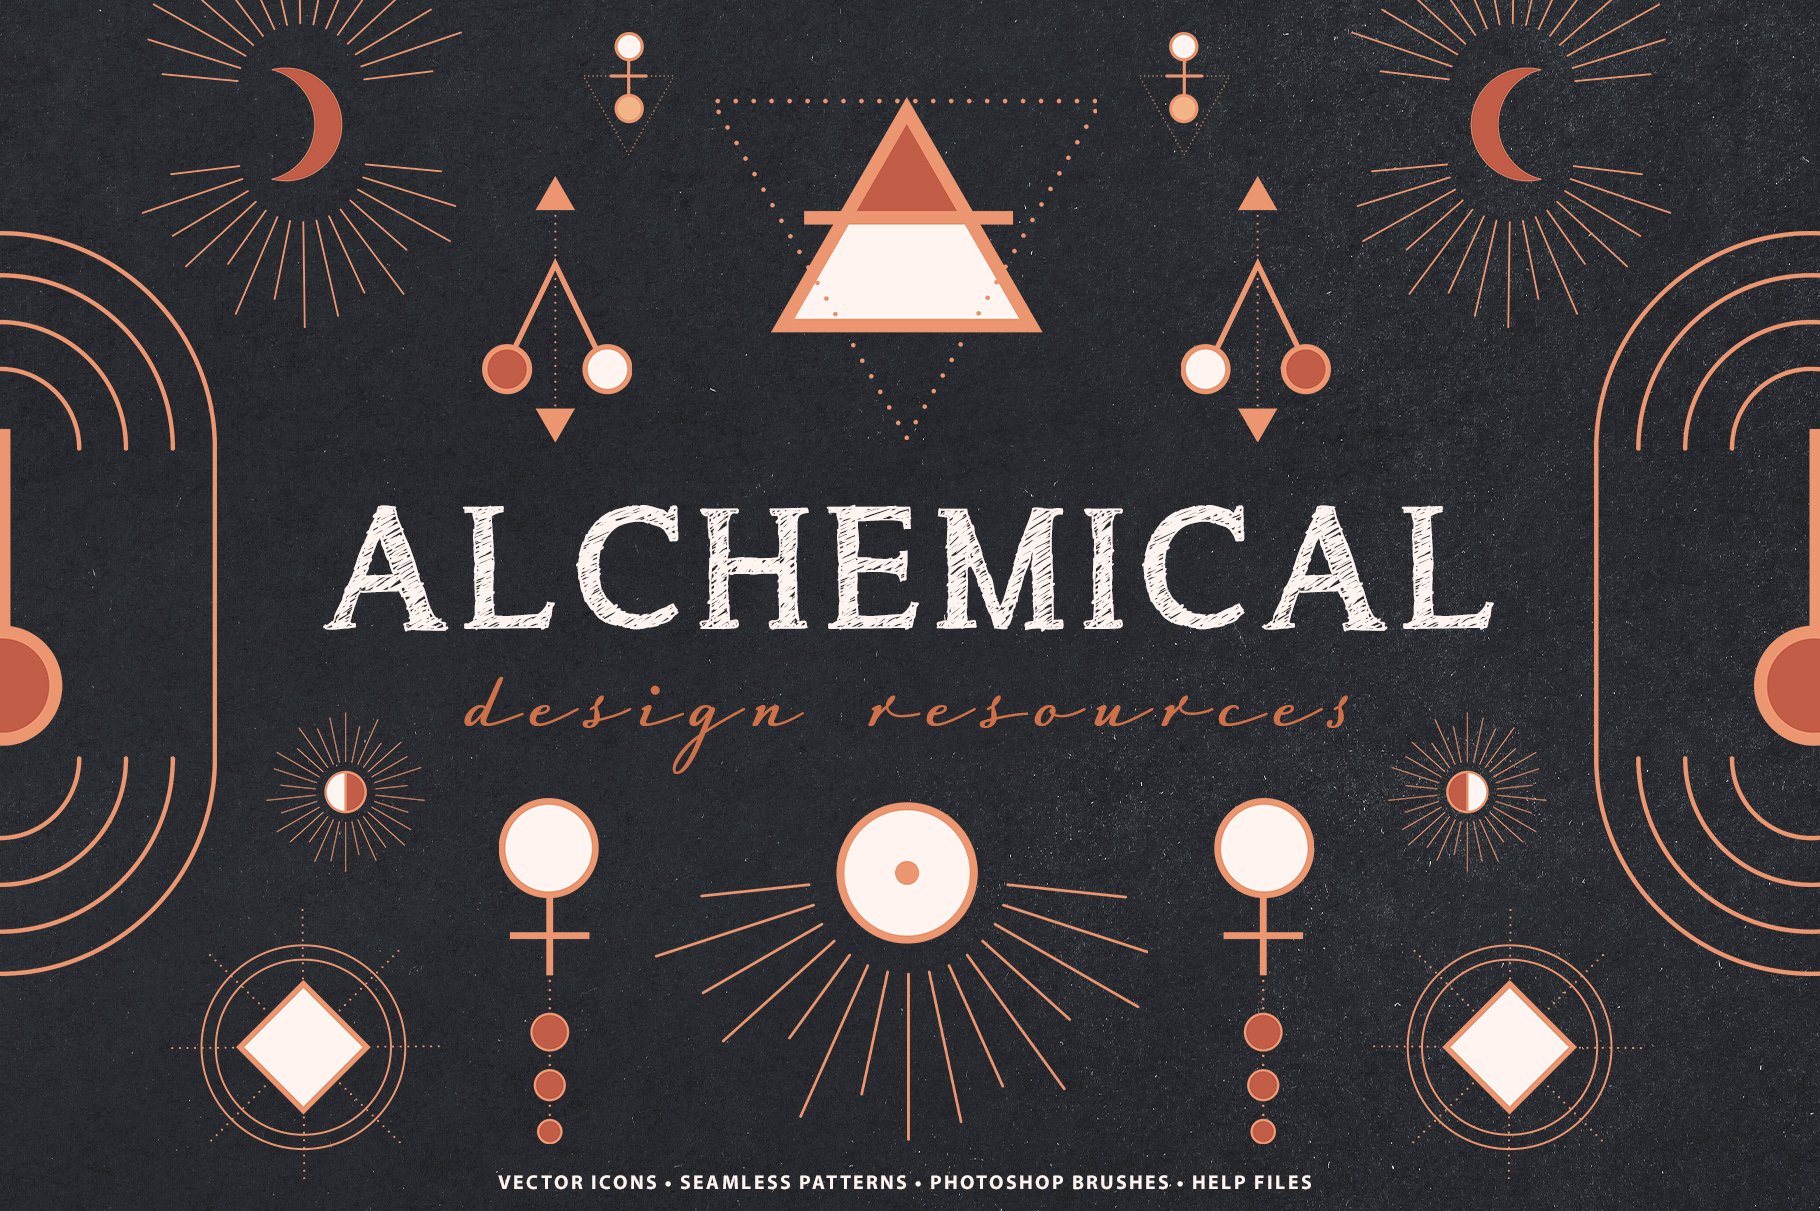 Alchemical Design Resources cover image.